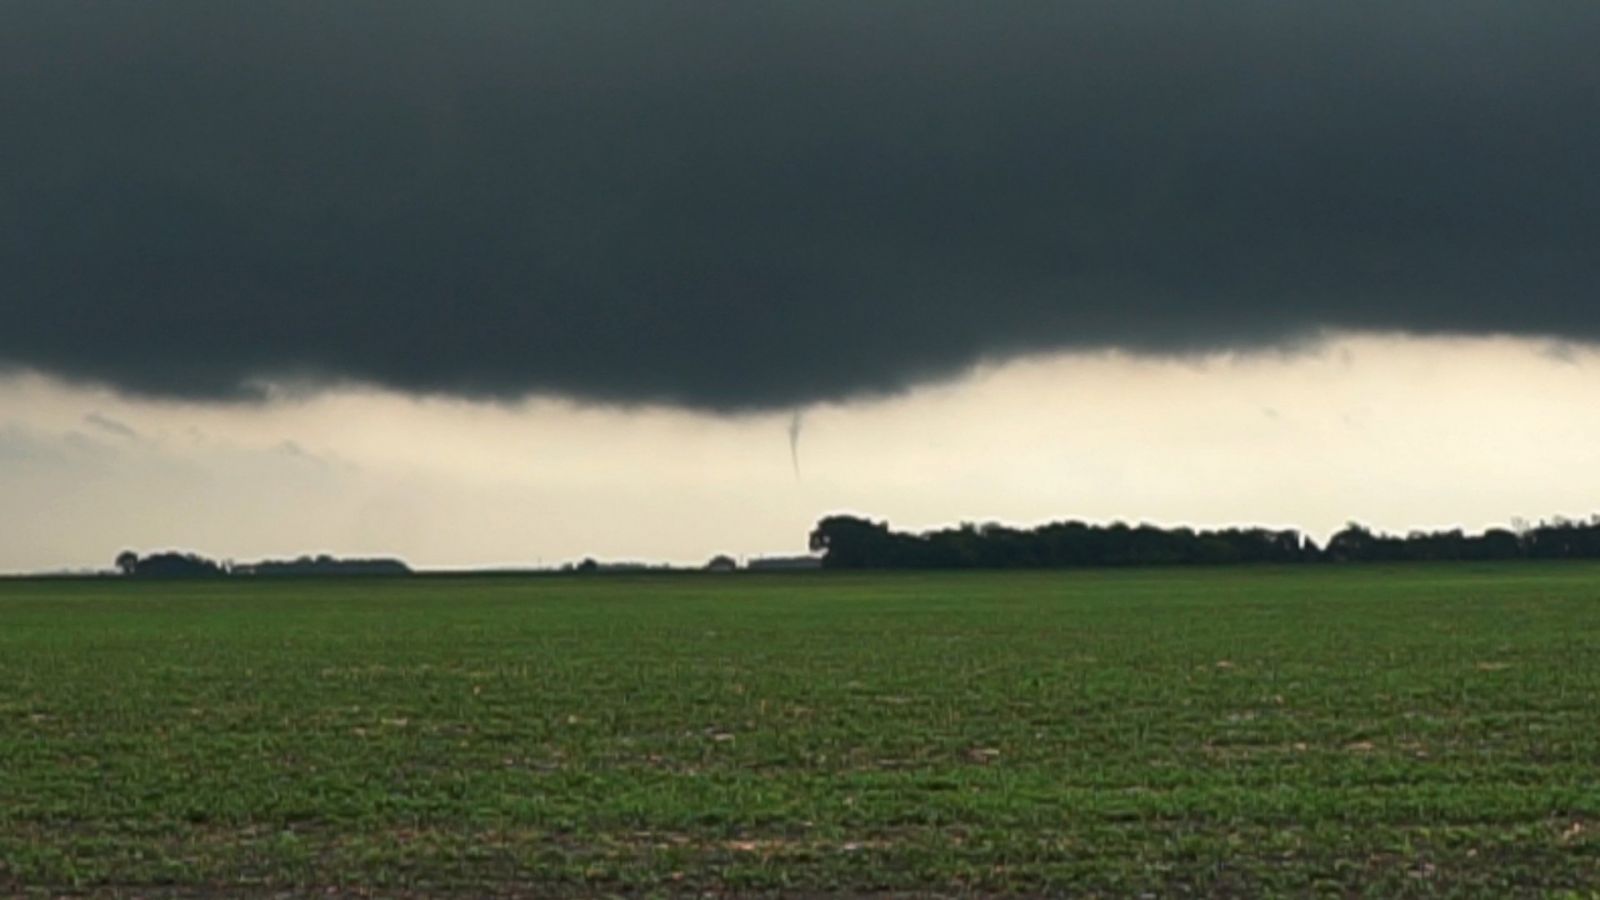 Image taken by Jason at 5:50 PM north of Barry